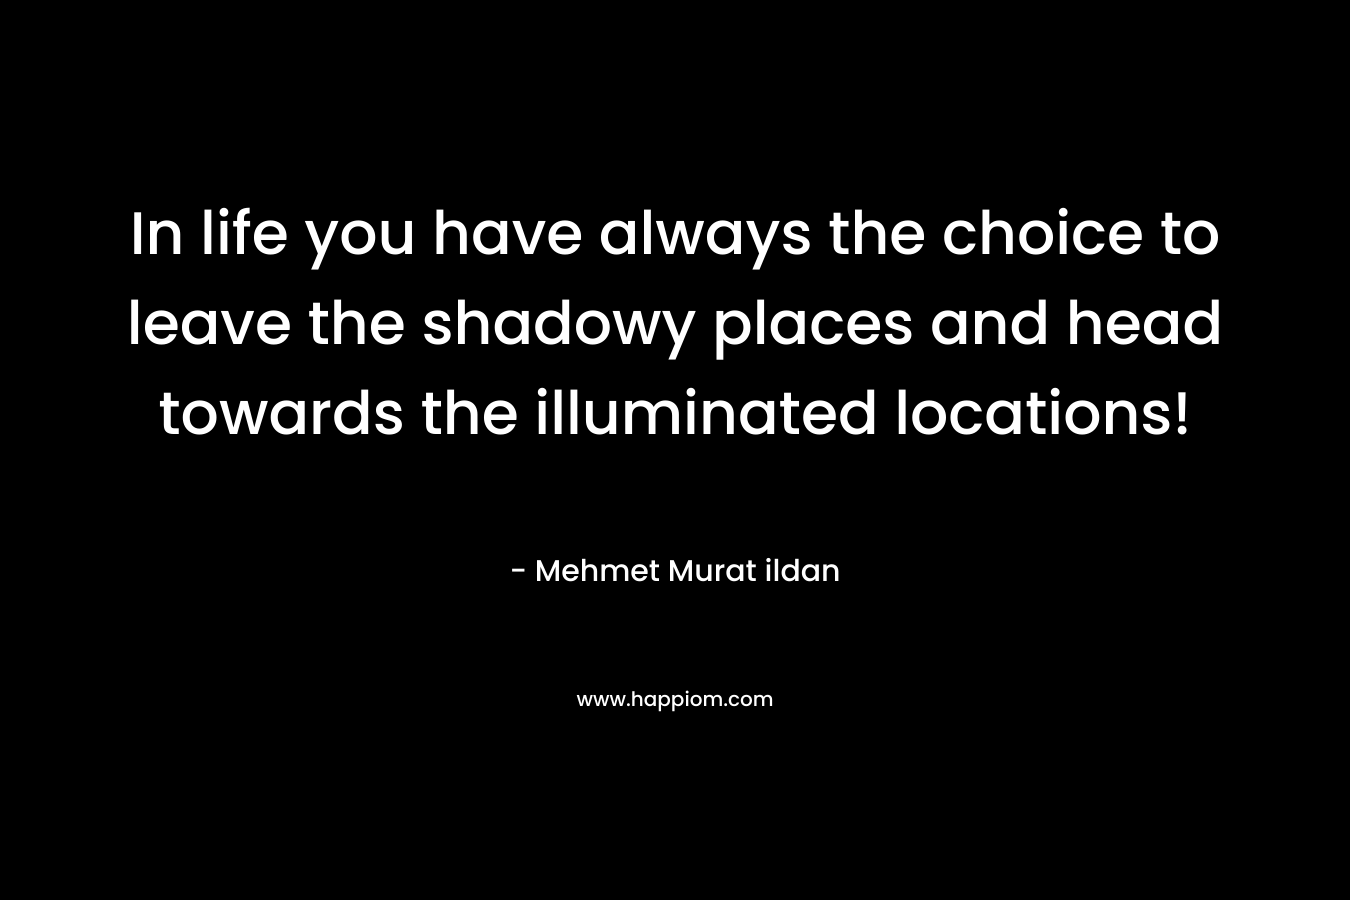 In life you have always the choice to leave the shadowy places and head towards the illuminated locations! – Mehmet Murat ildan